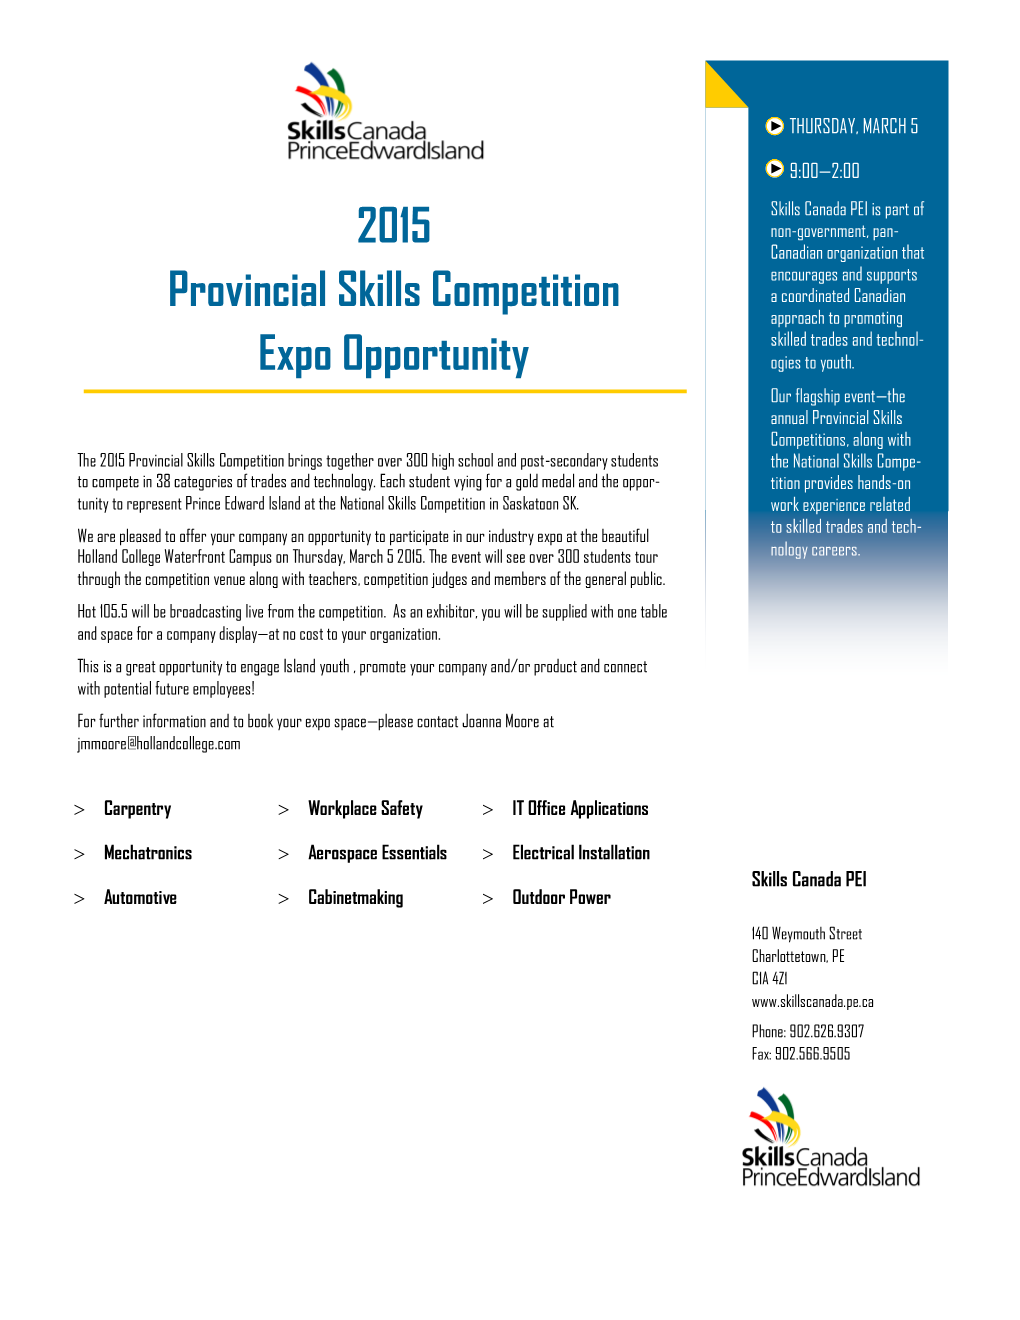 2015 Provincial Skills Competition Expo Opportunity